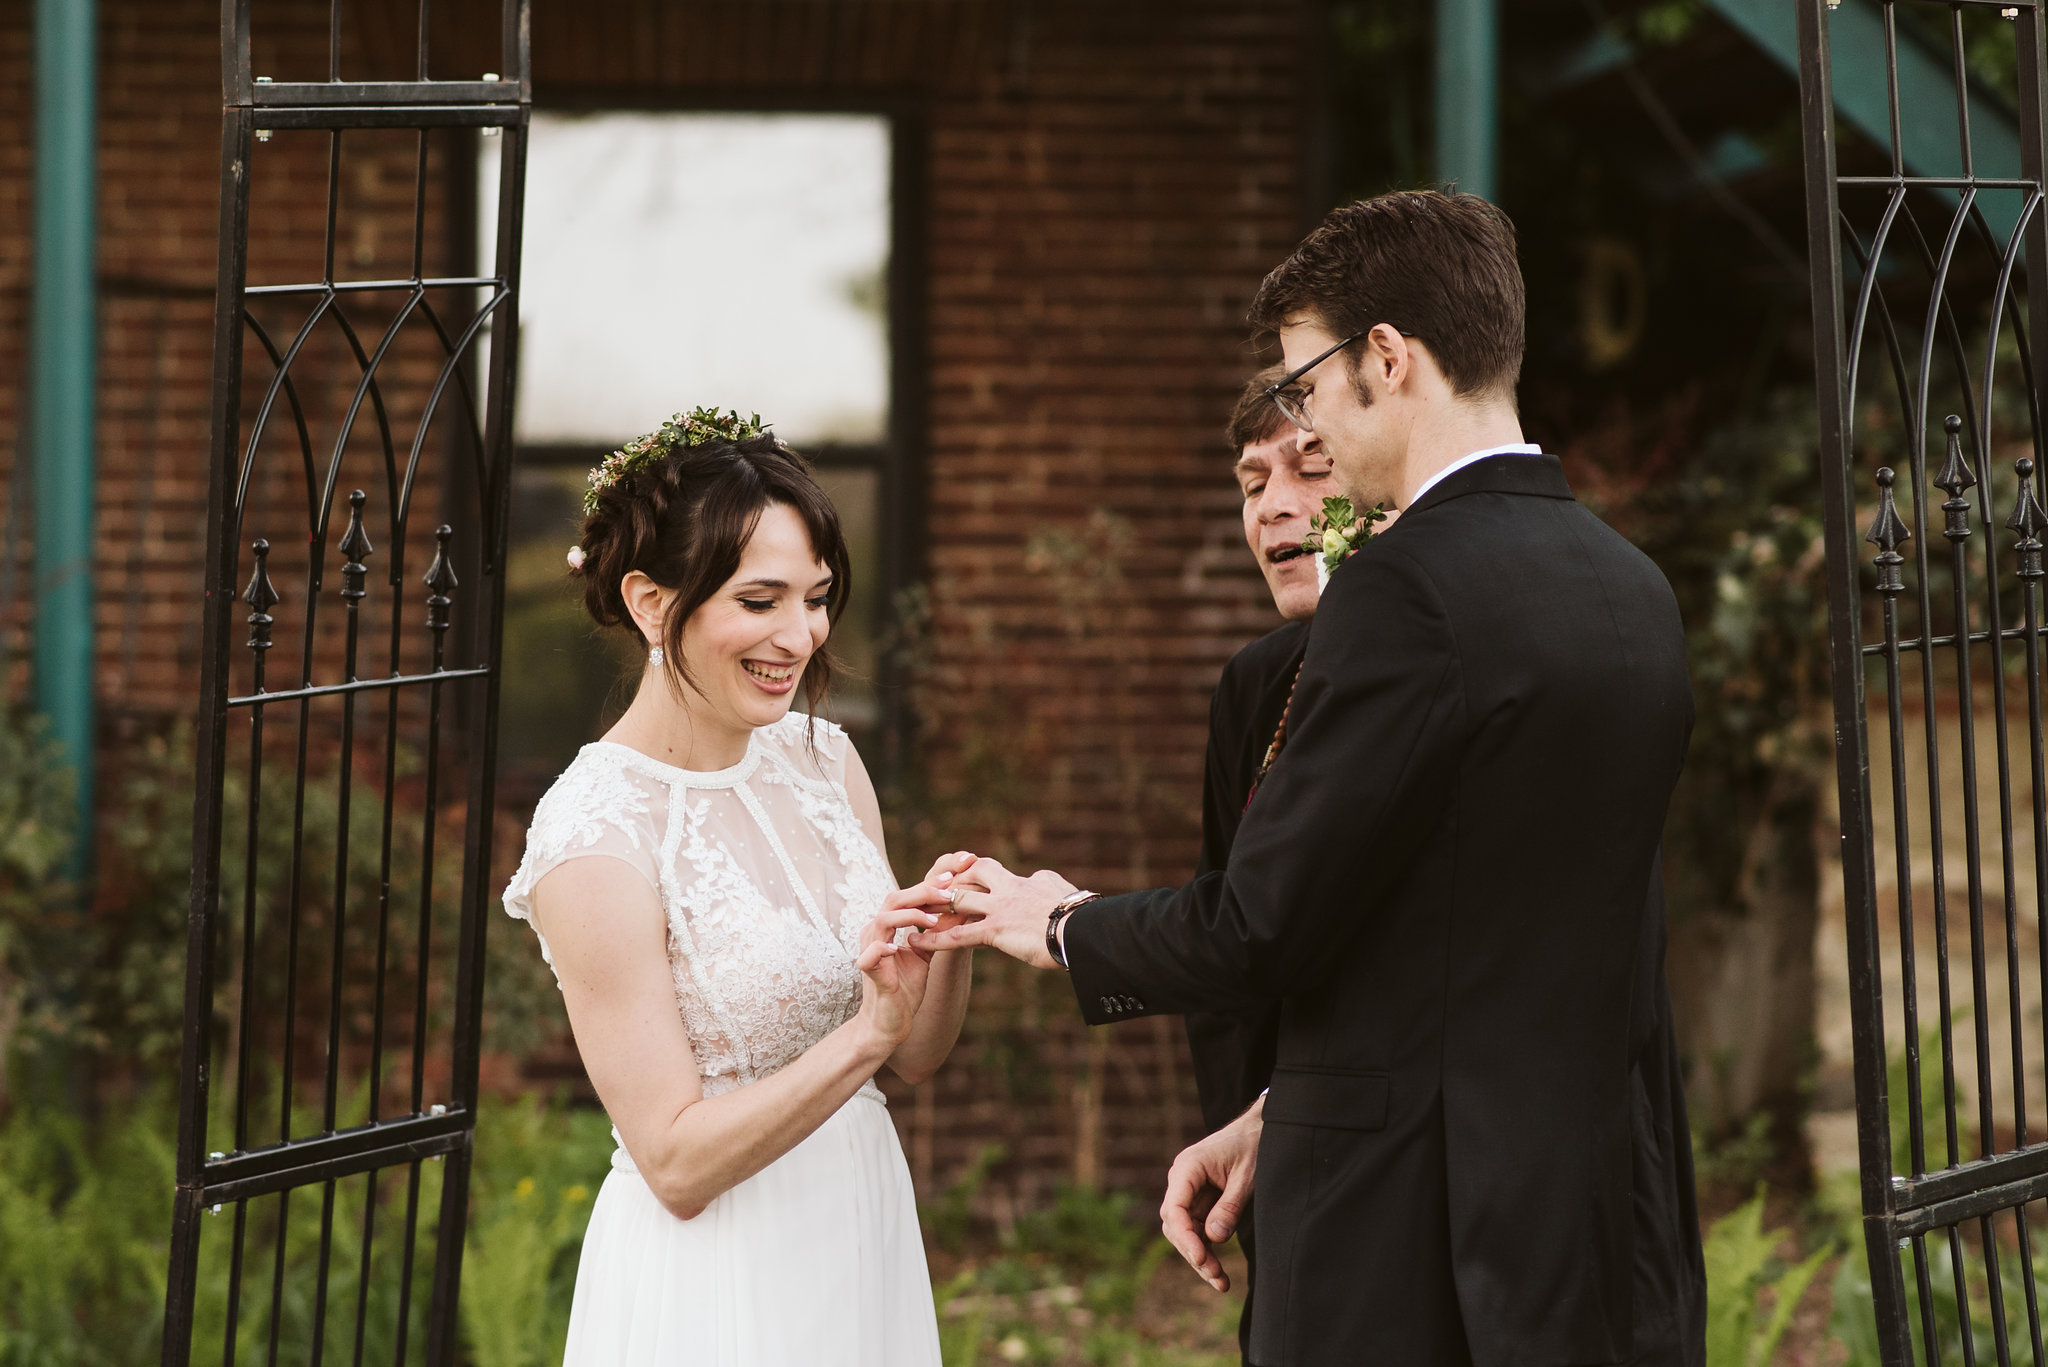  Baltimore, Maryland Wedding Photographer, Hampden, Eco-Friendly, Green, The Elm, Simple and Classic, Vintage, Bride and Groom Exchanging Rings, La Vie En Blanc Dress, Outdoor Ceremony 